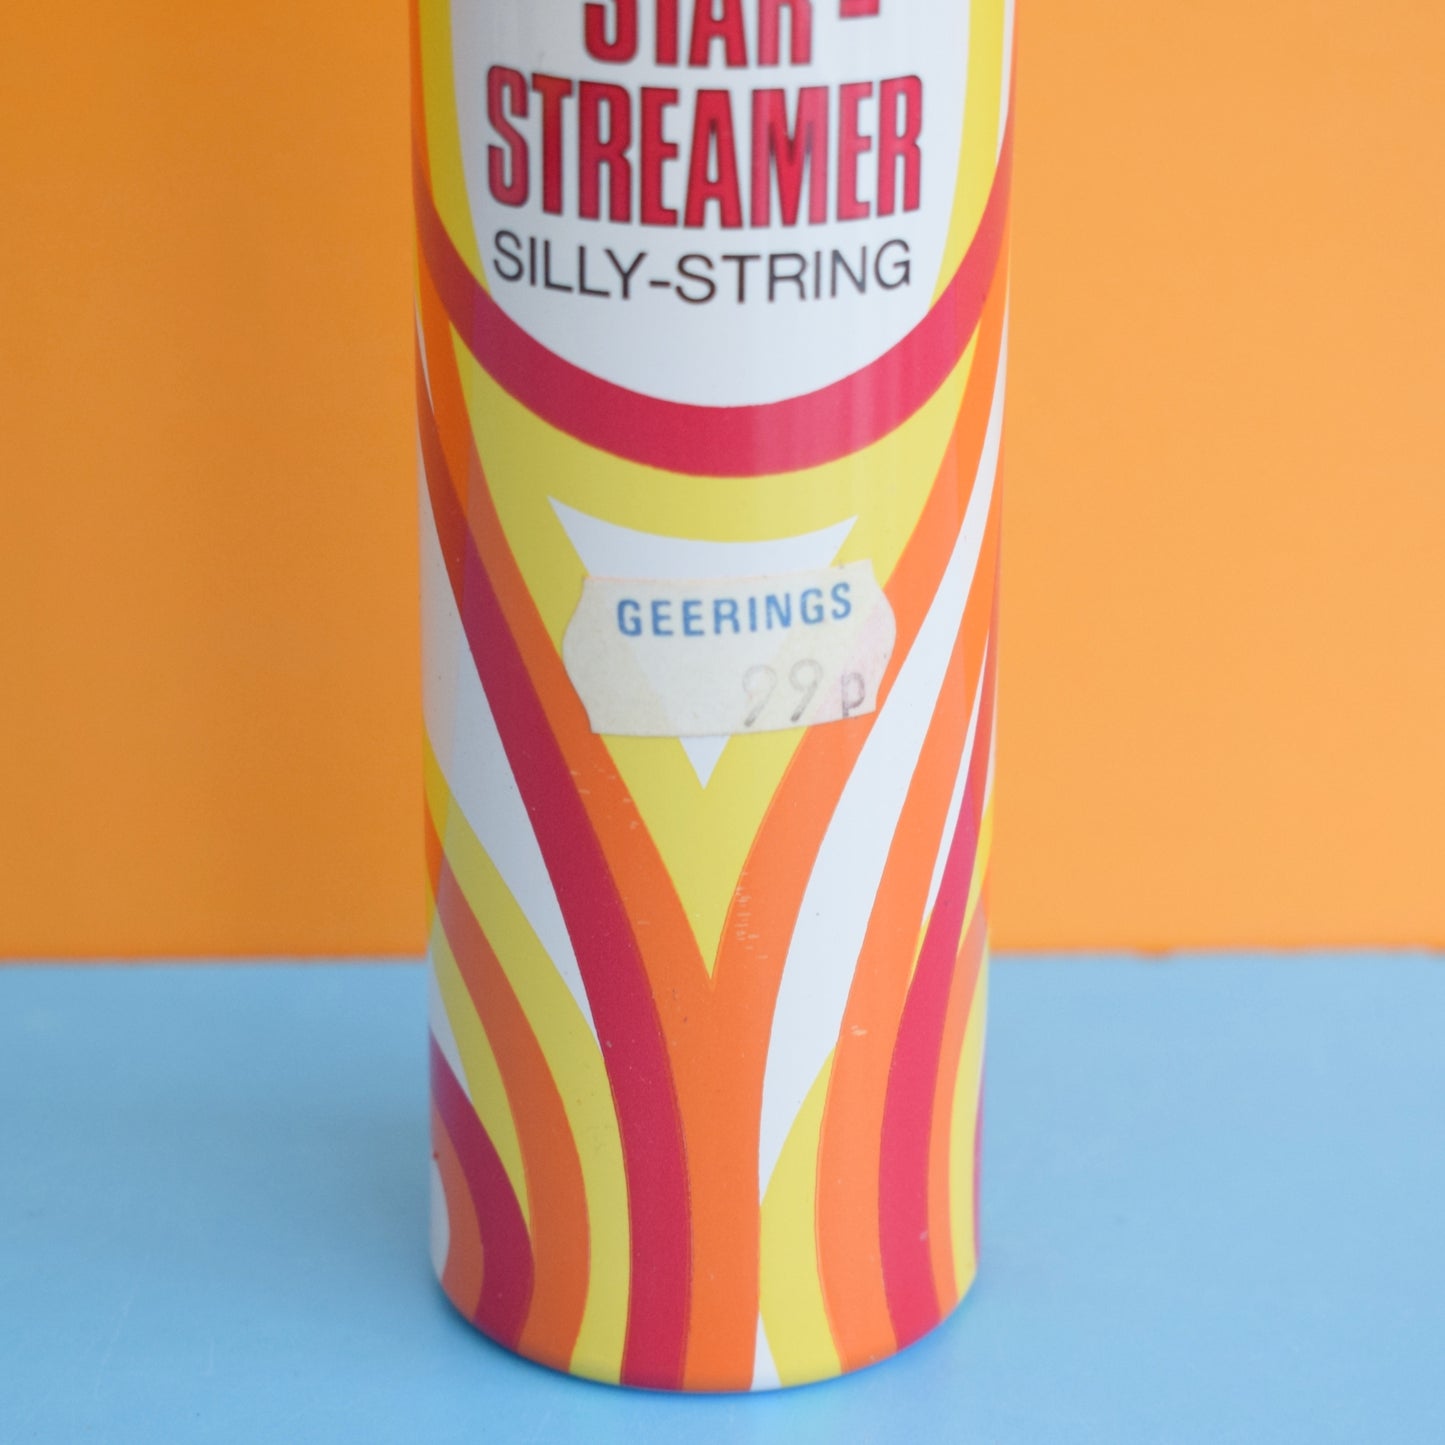 Vintage 1970s Star Streamer Silly String Can